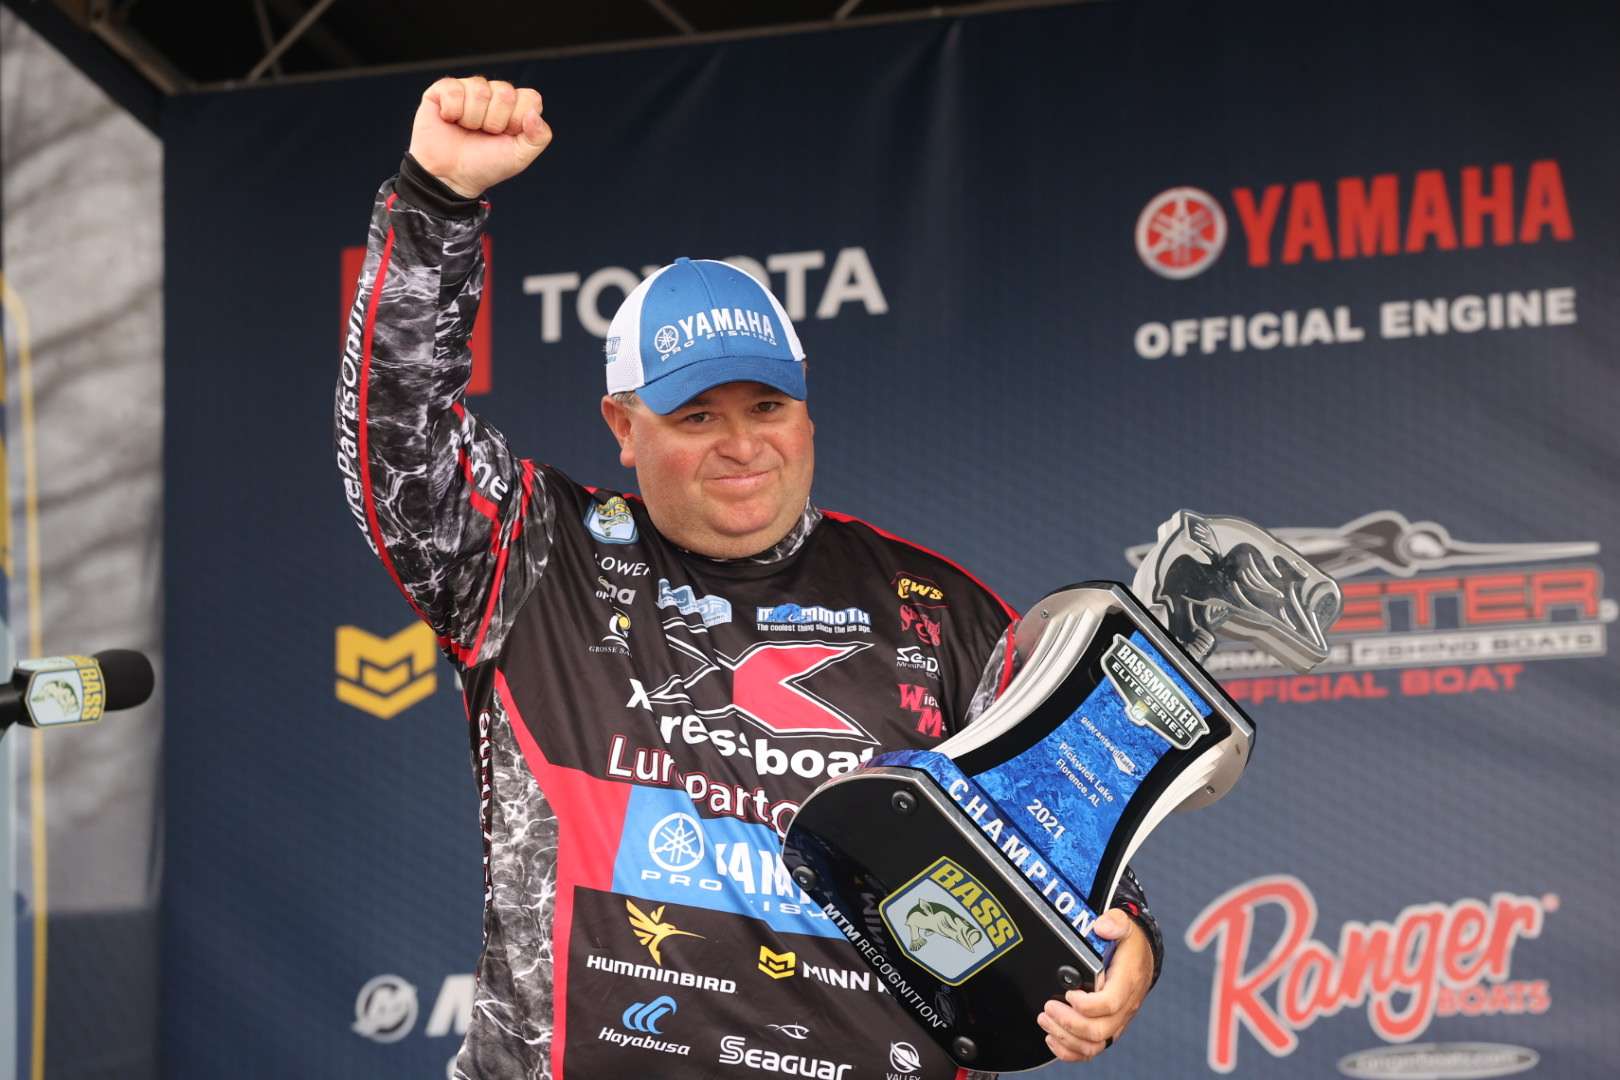 Bill Lowen captured his first, and long-awaited, Elite Series victory at Pickwick in 2021 weighing in 83-5.